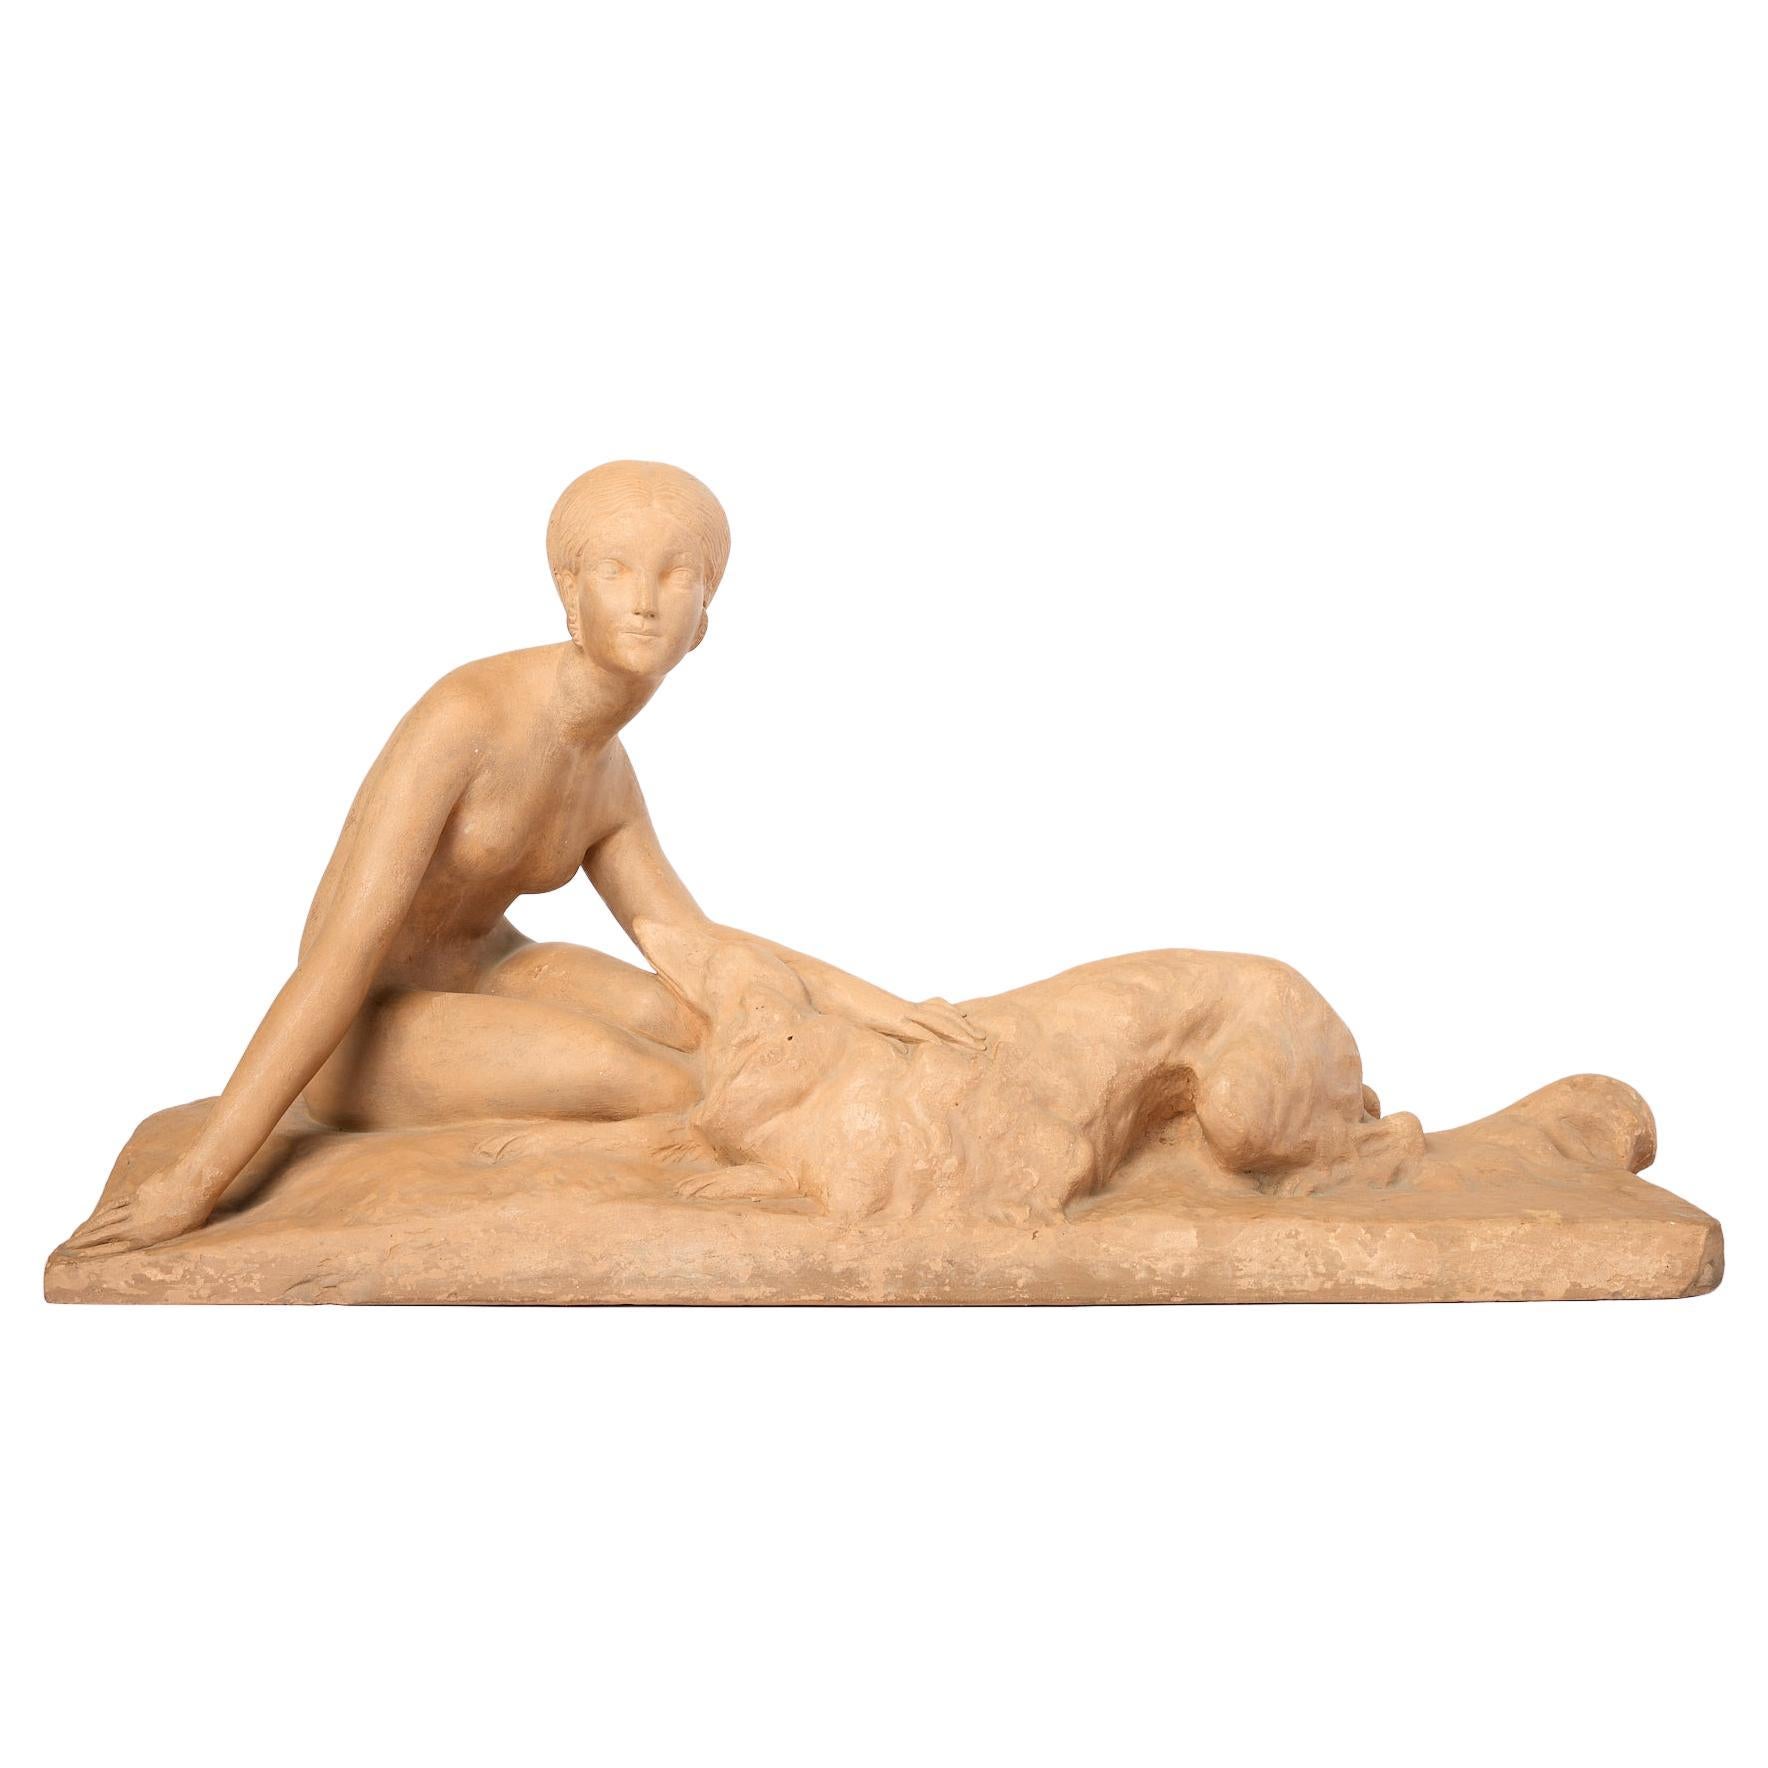  French Art Deco Terracotta Sculpture of A Woman with a Dog,  by George Costes For Sale